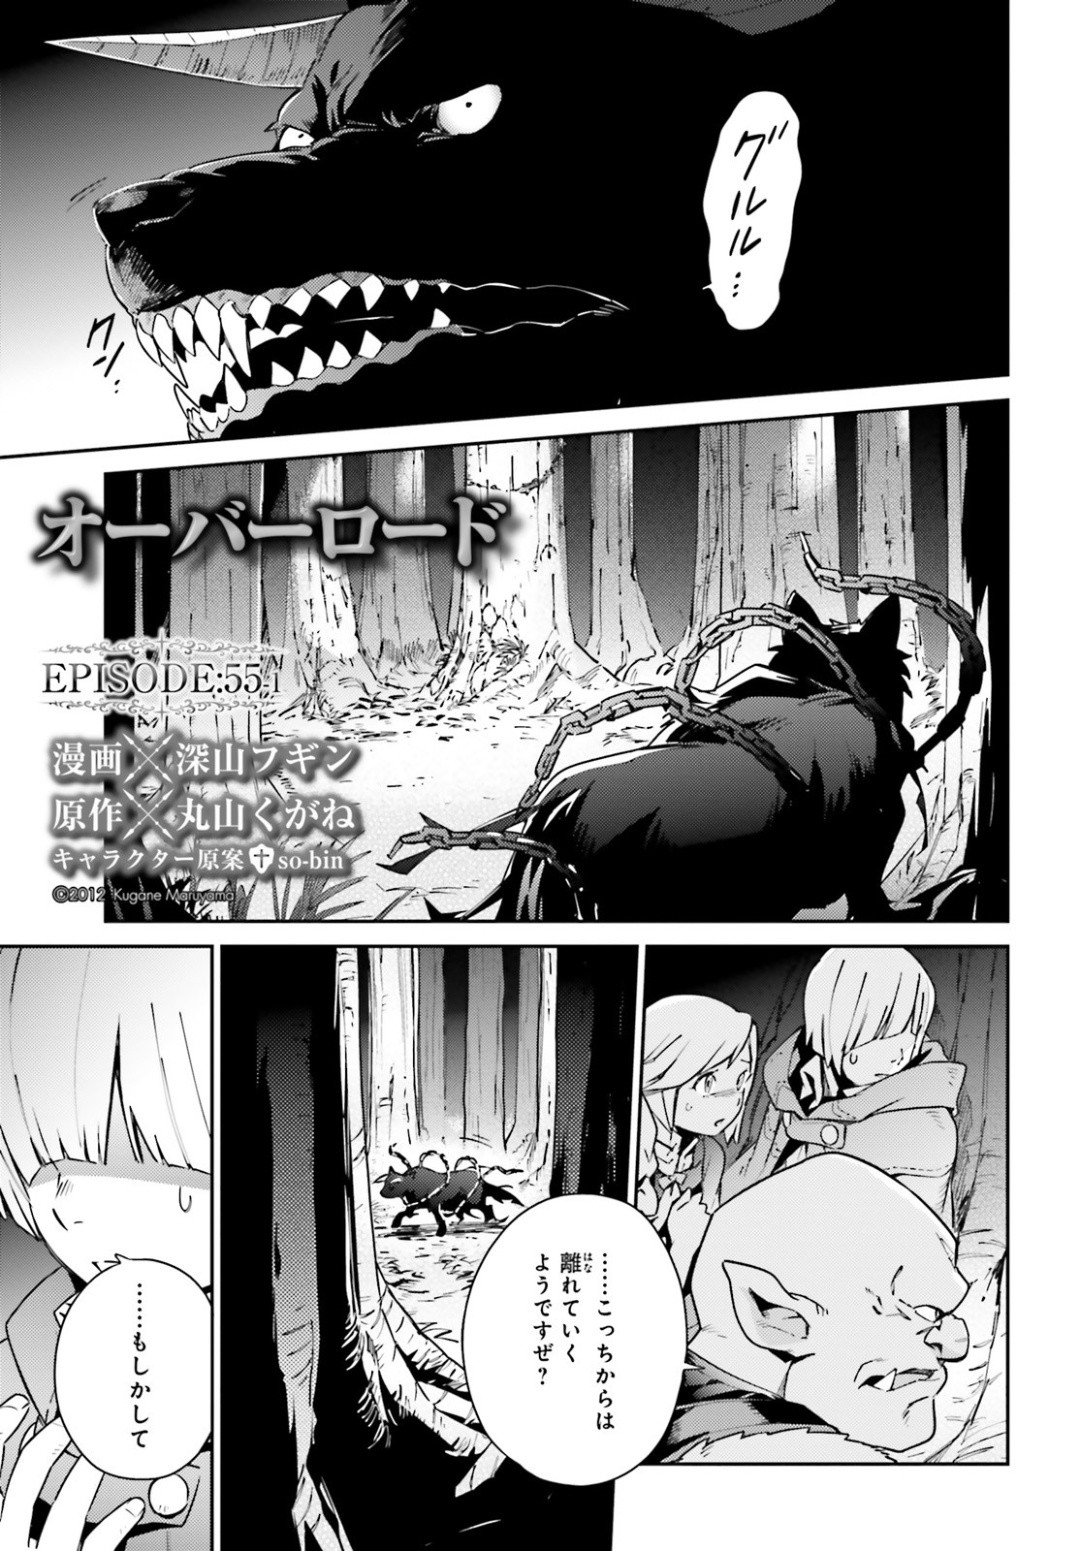 Overlord - Chapter 55 - Page 1